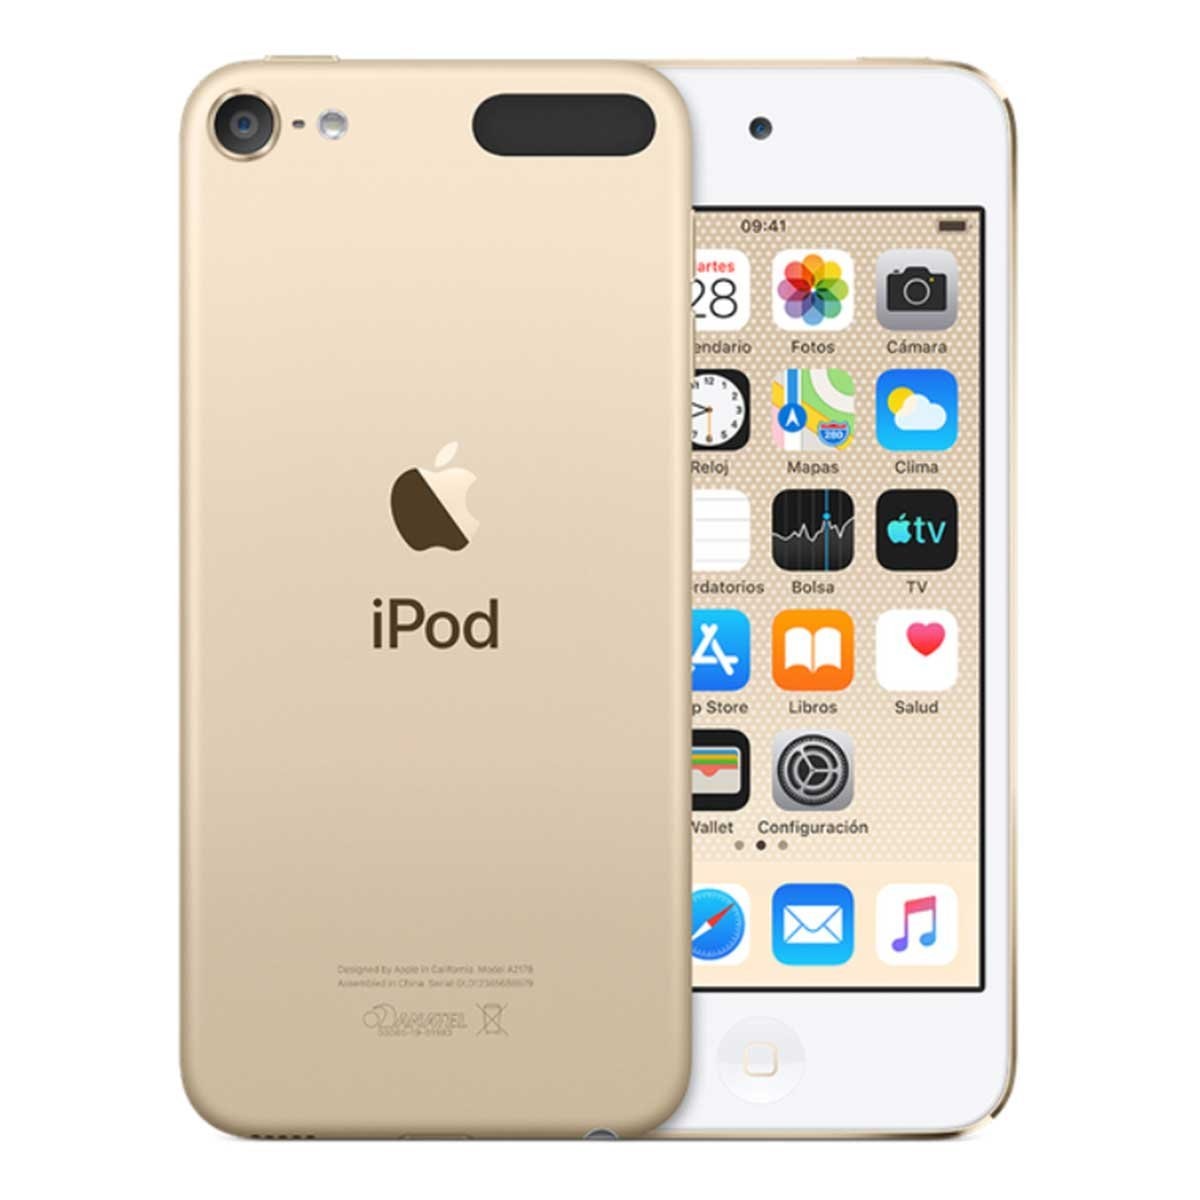 Ipod touch 7th 32gb gold-bes mvht2be/a - Sears